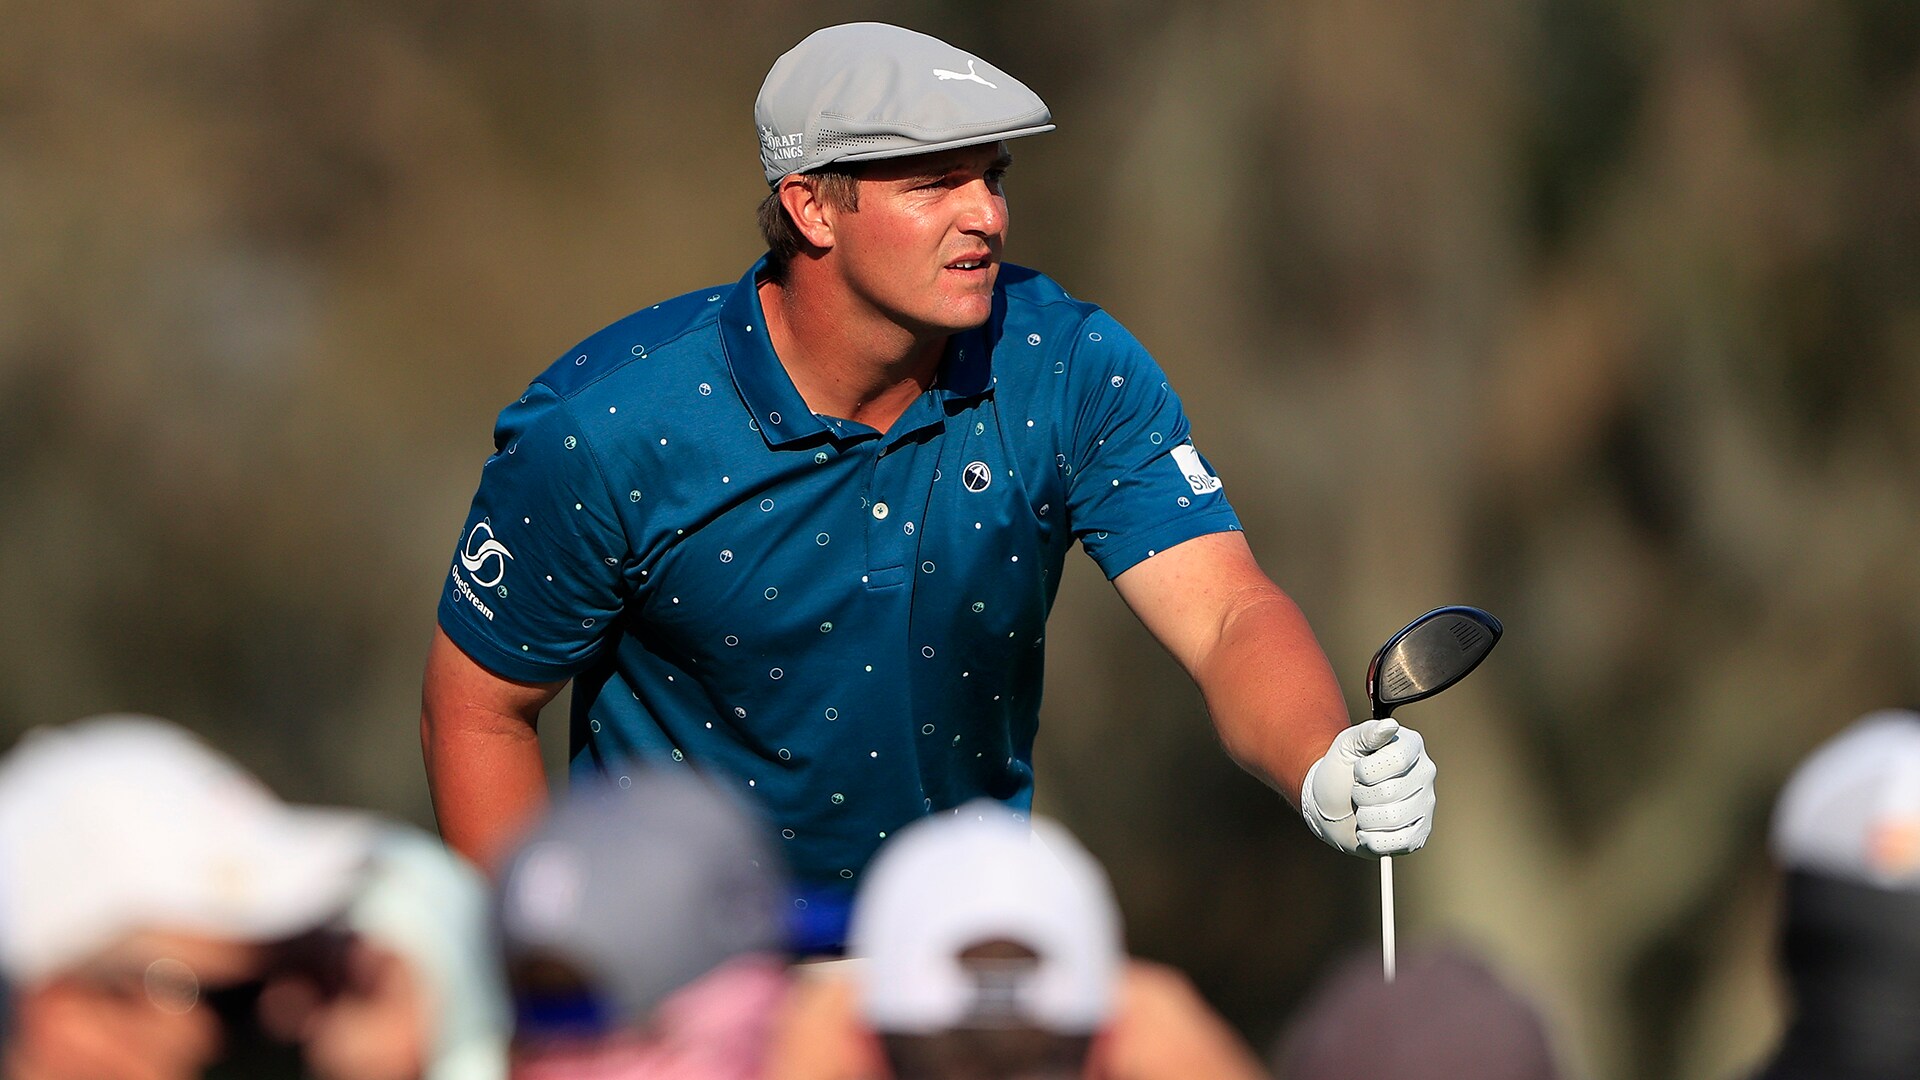 Six packed: They came to watch Bryson DeChambeau drive a par 5, they might see him win instead